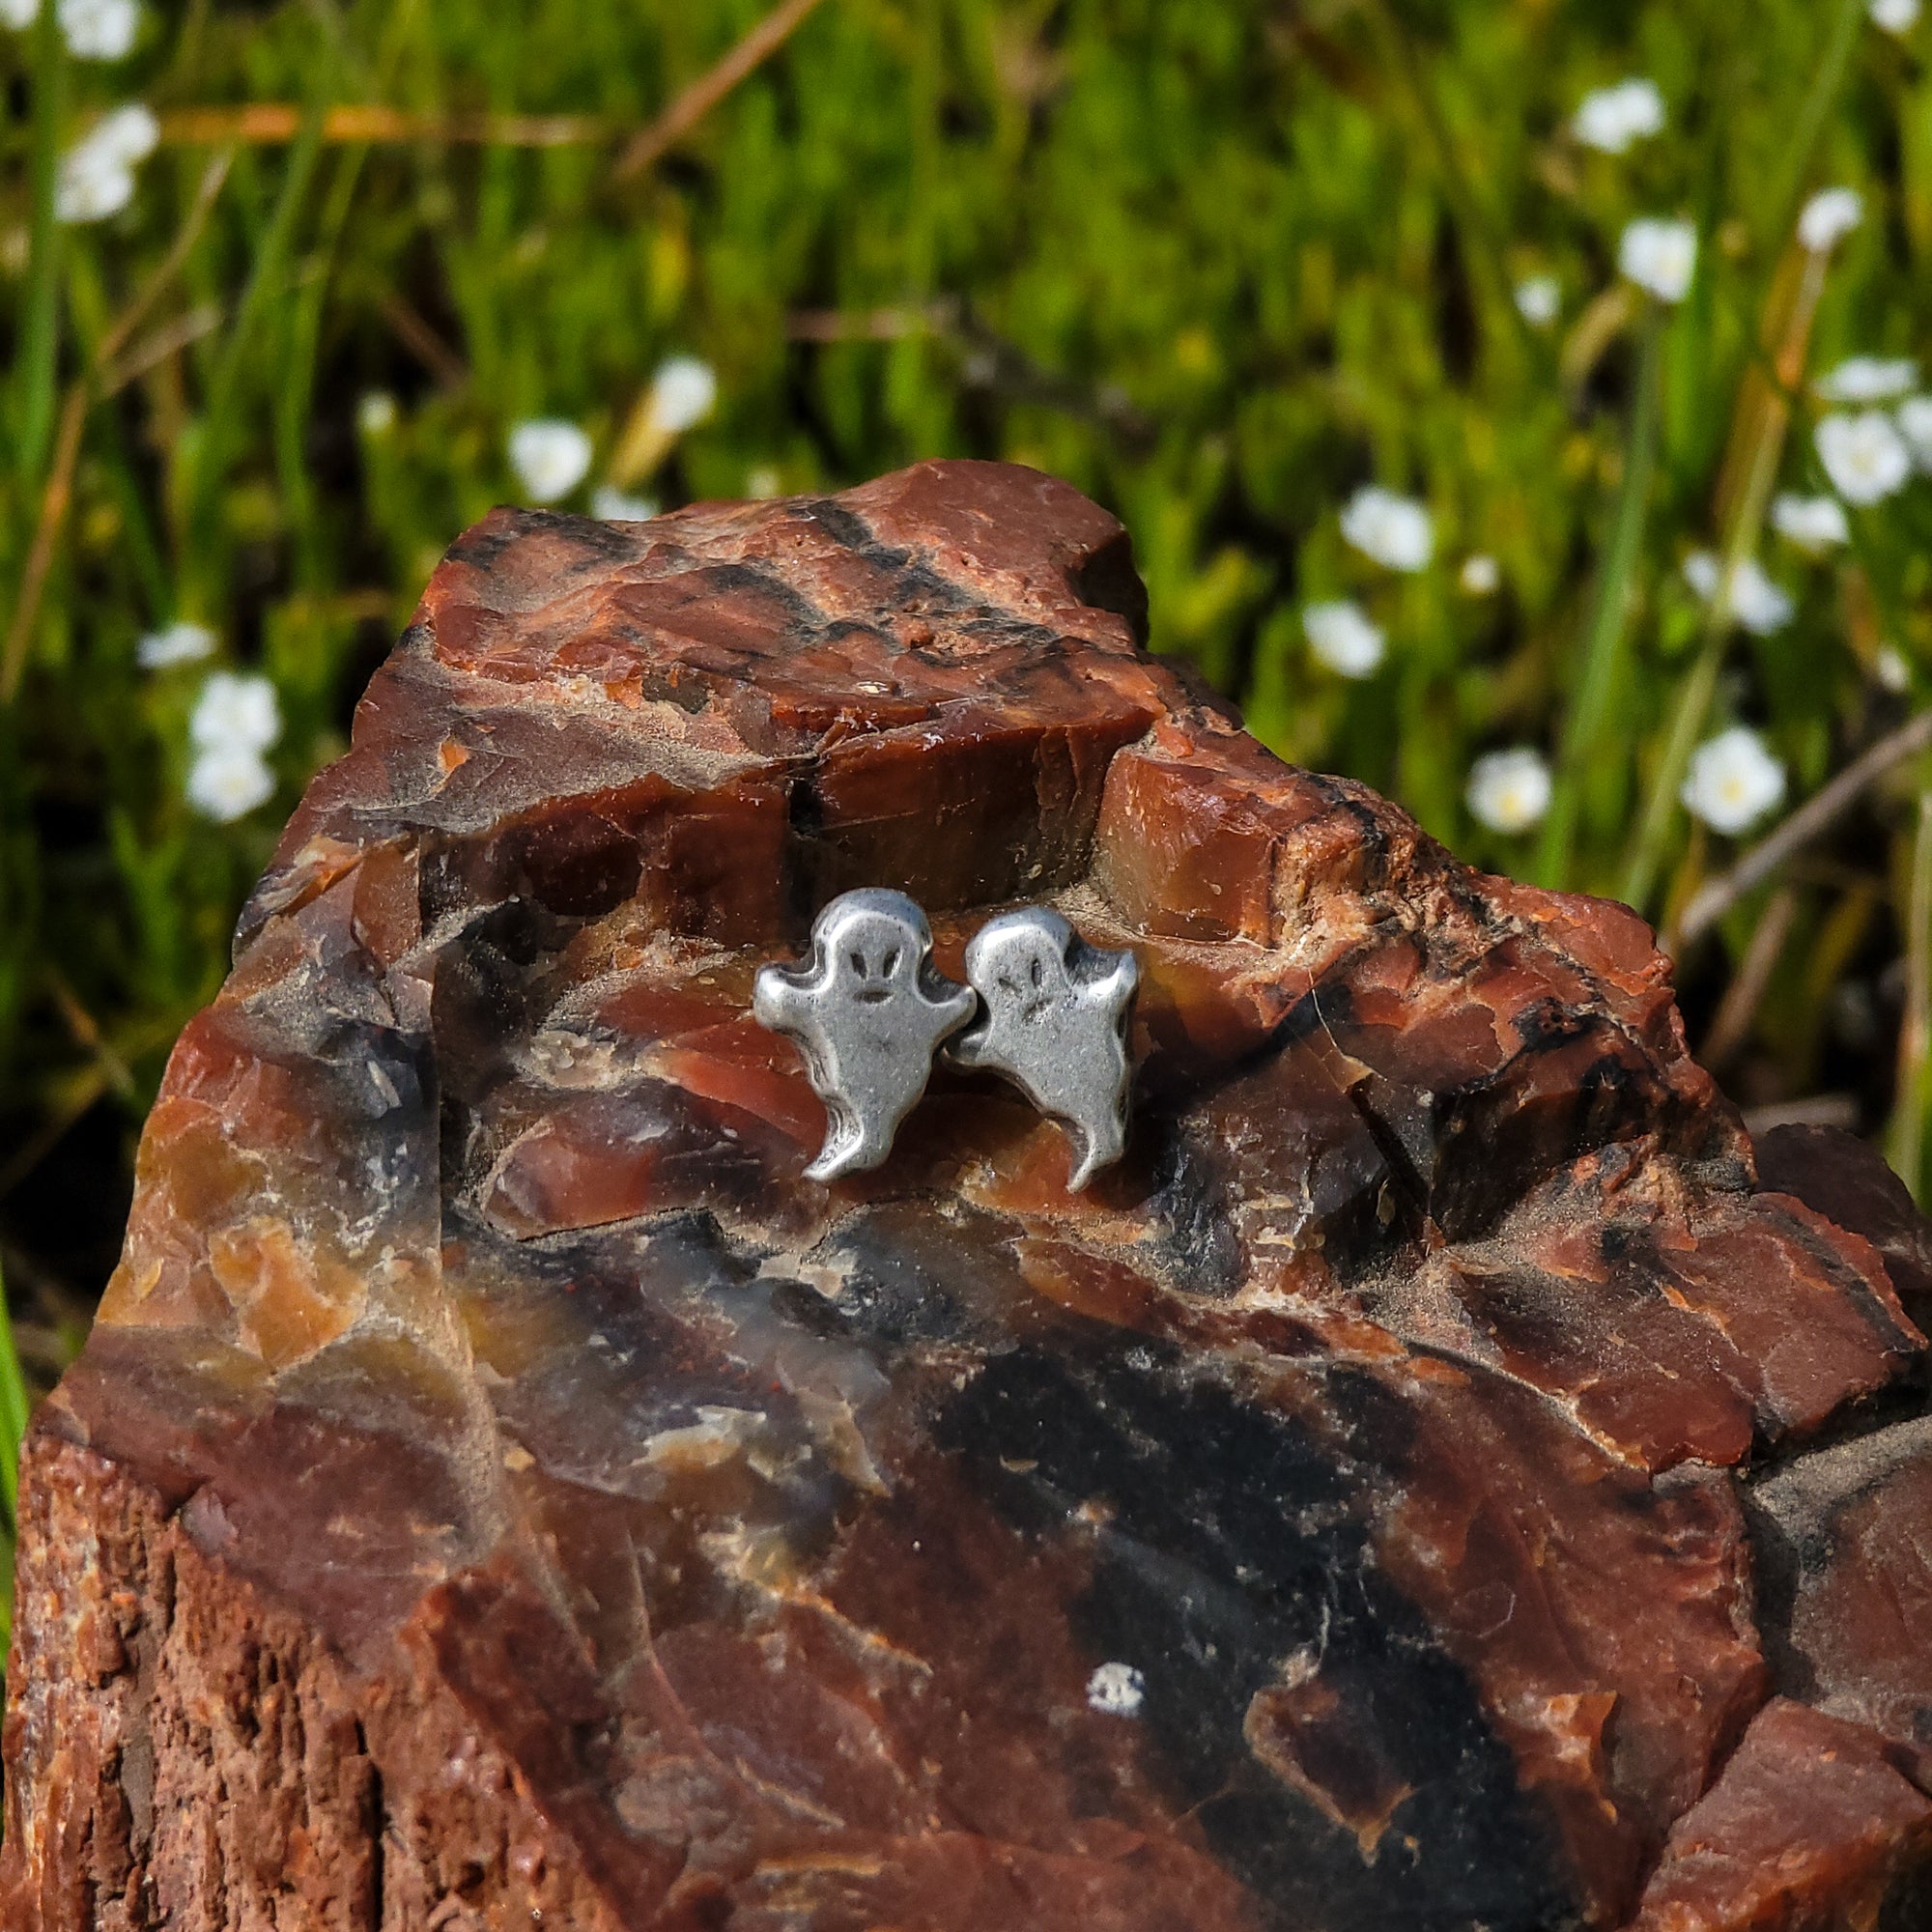 This photo features a pair of handmade sterling silver stud earrings in the shape of smiling ghosts, placed on a piece of wood with green leaves and little white flowers in the background.